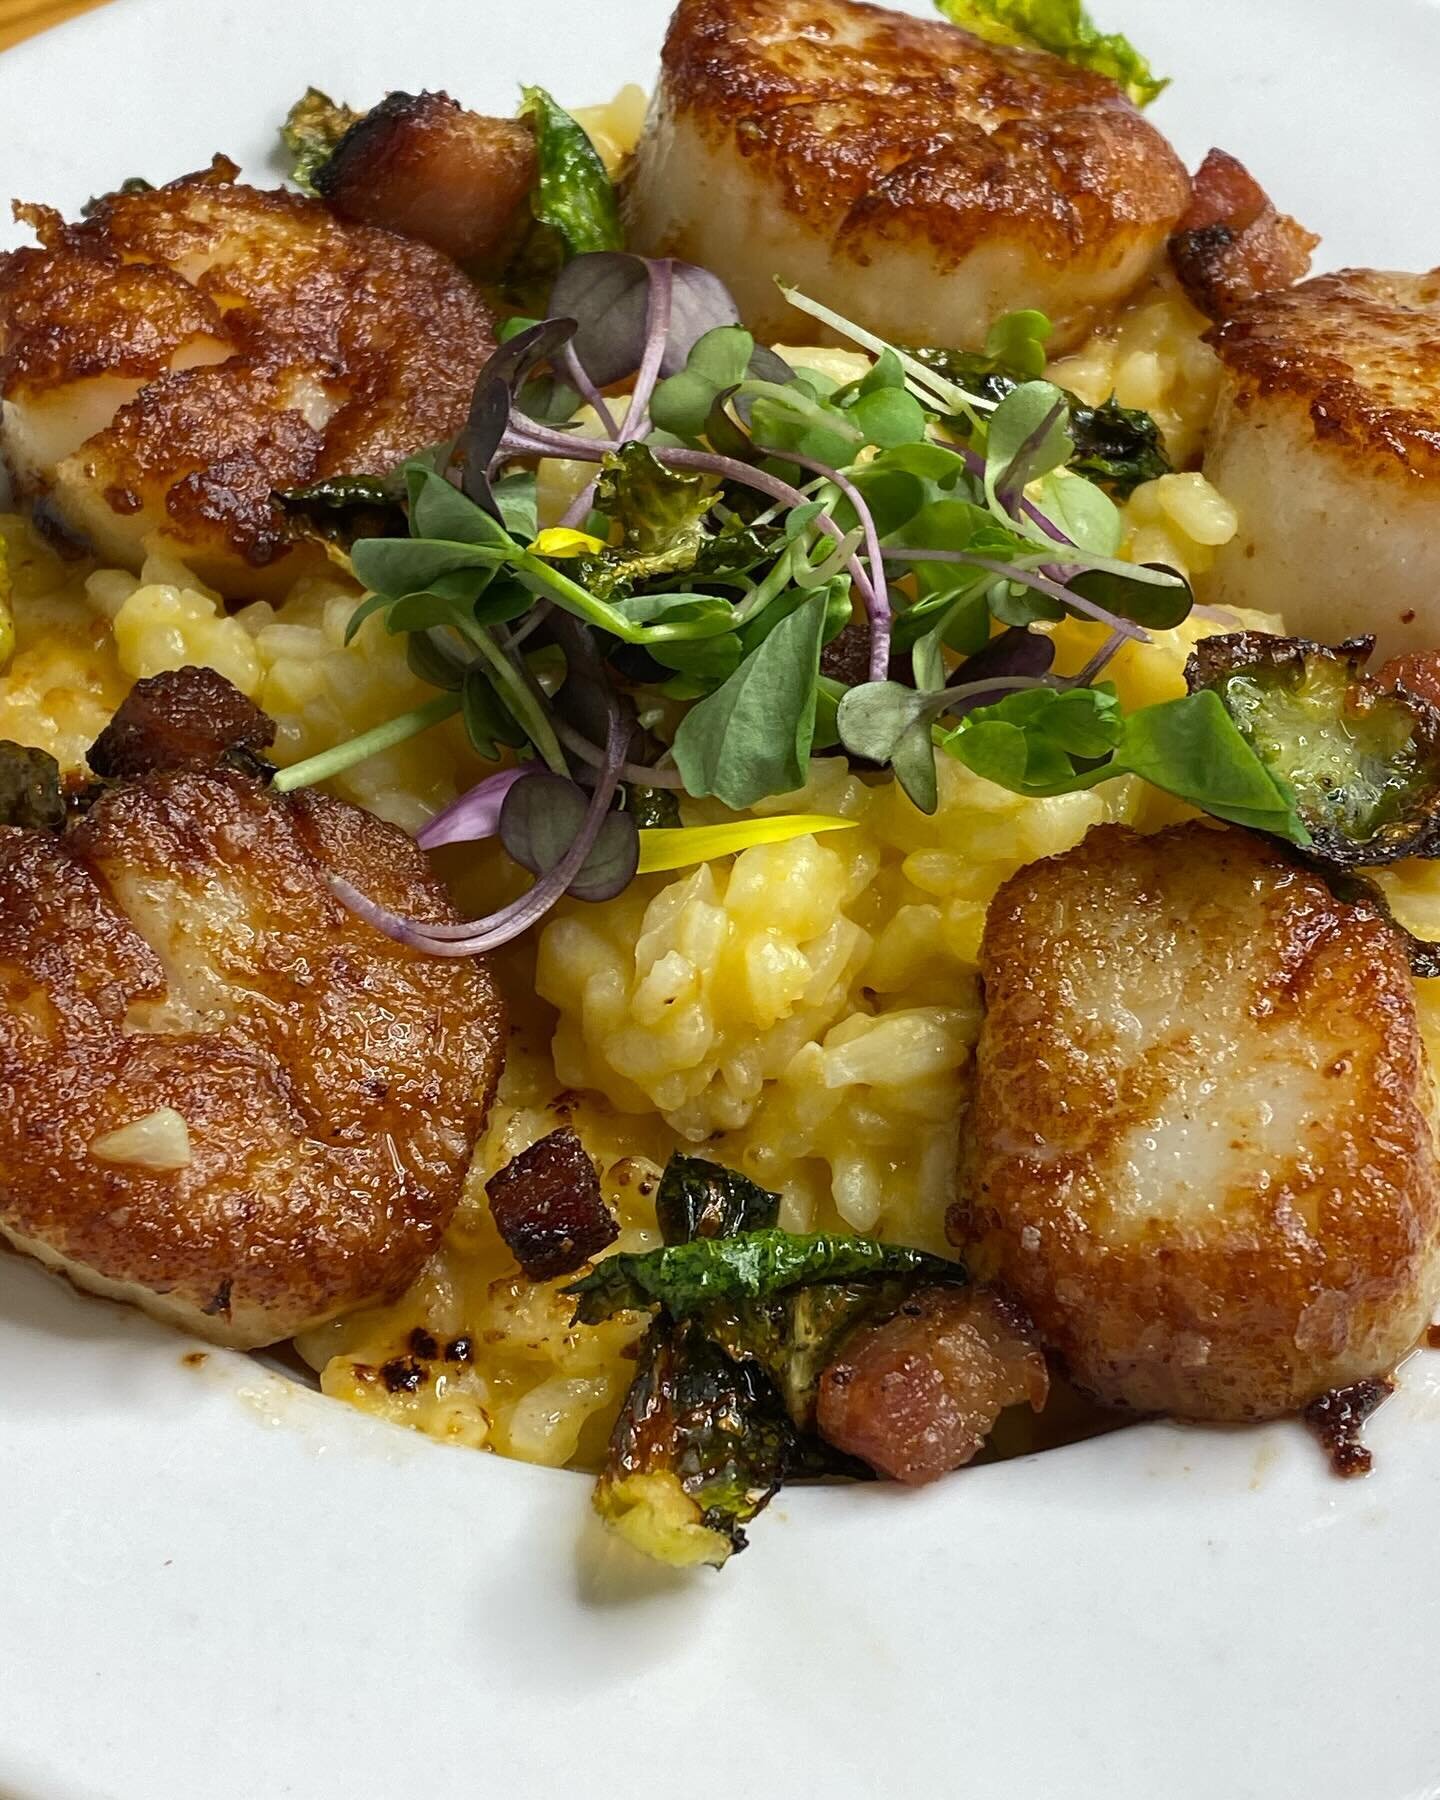 Seared scallops with winter risotto, lardons crispy Brussels and micro greens